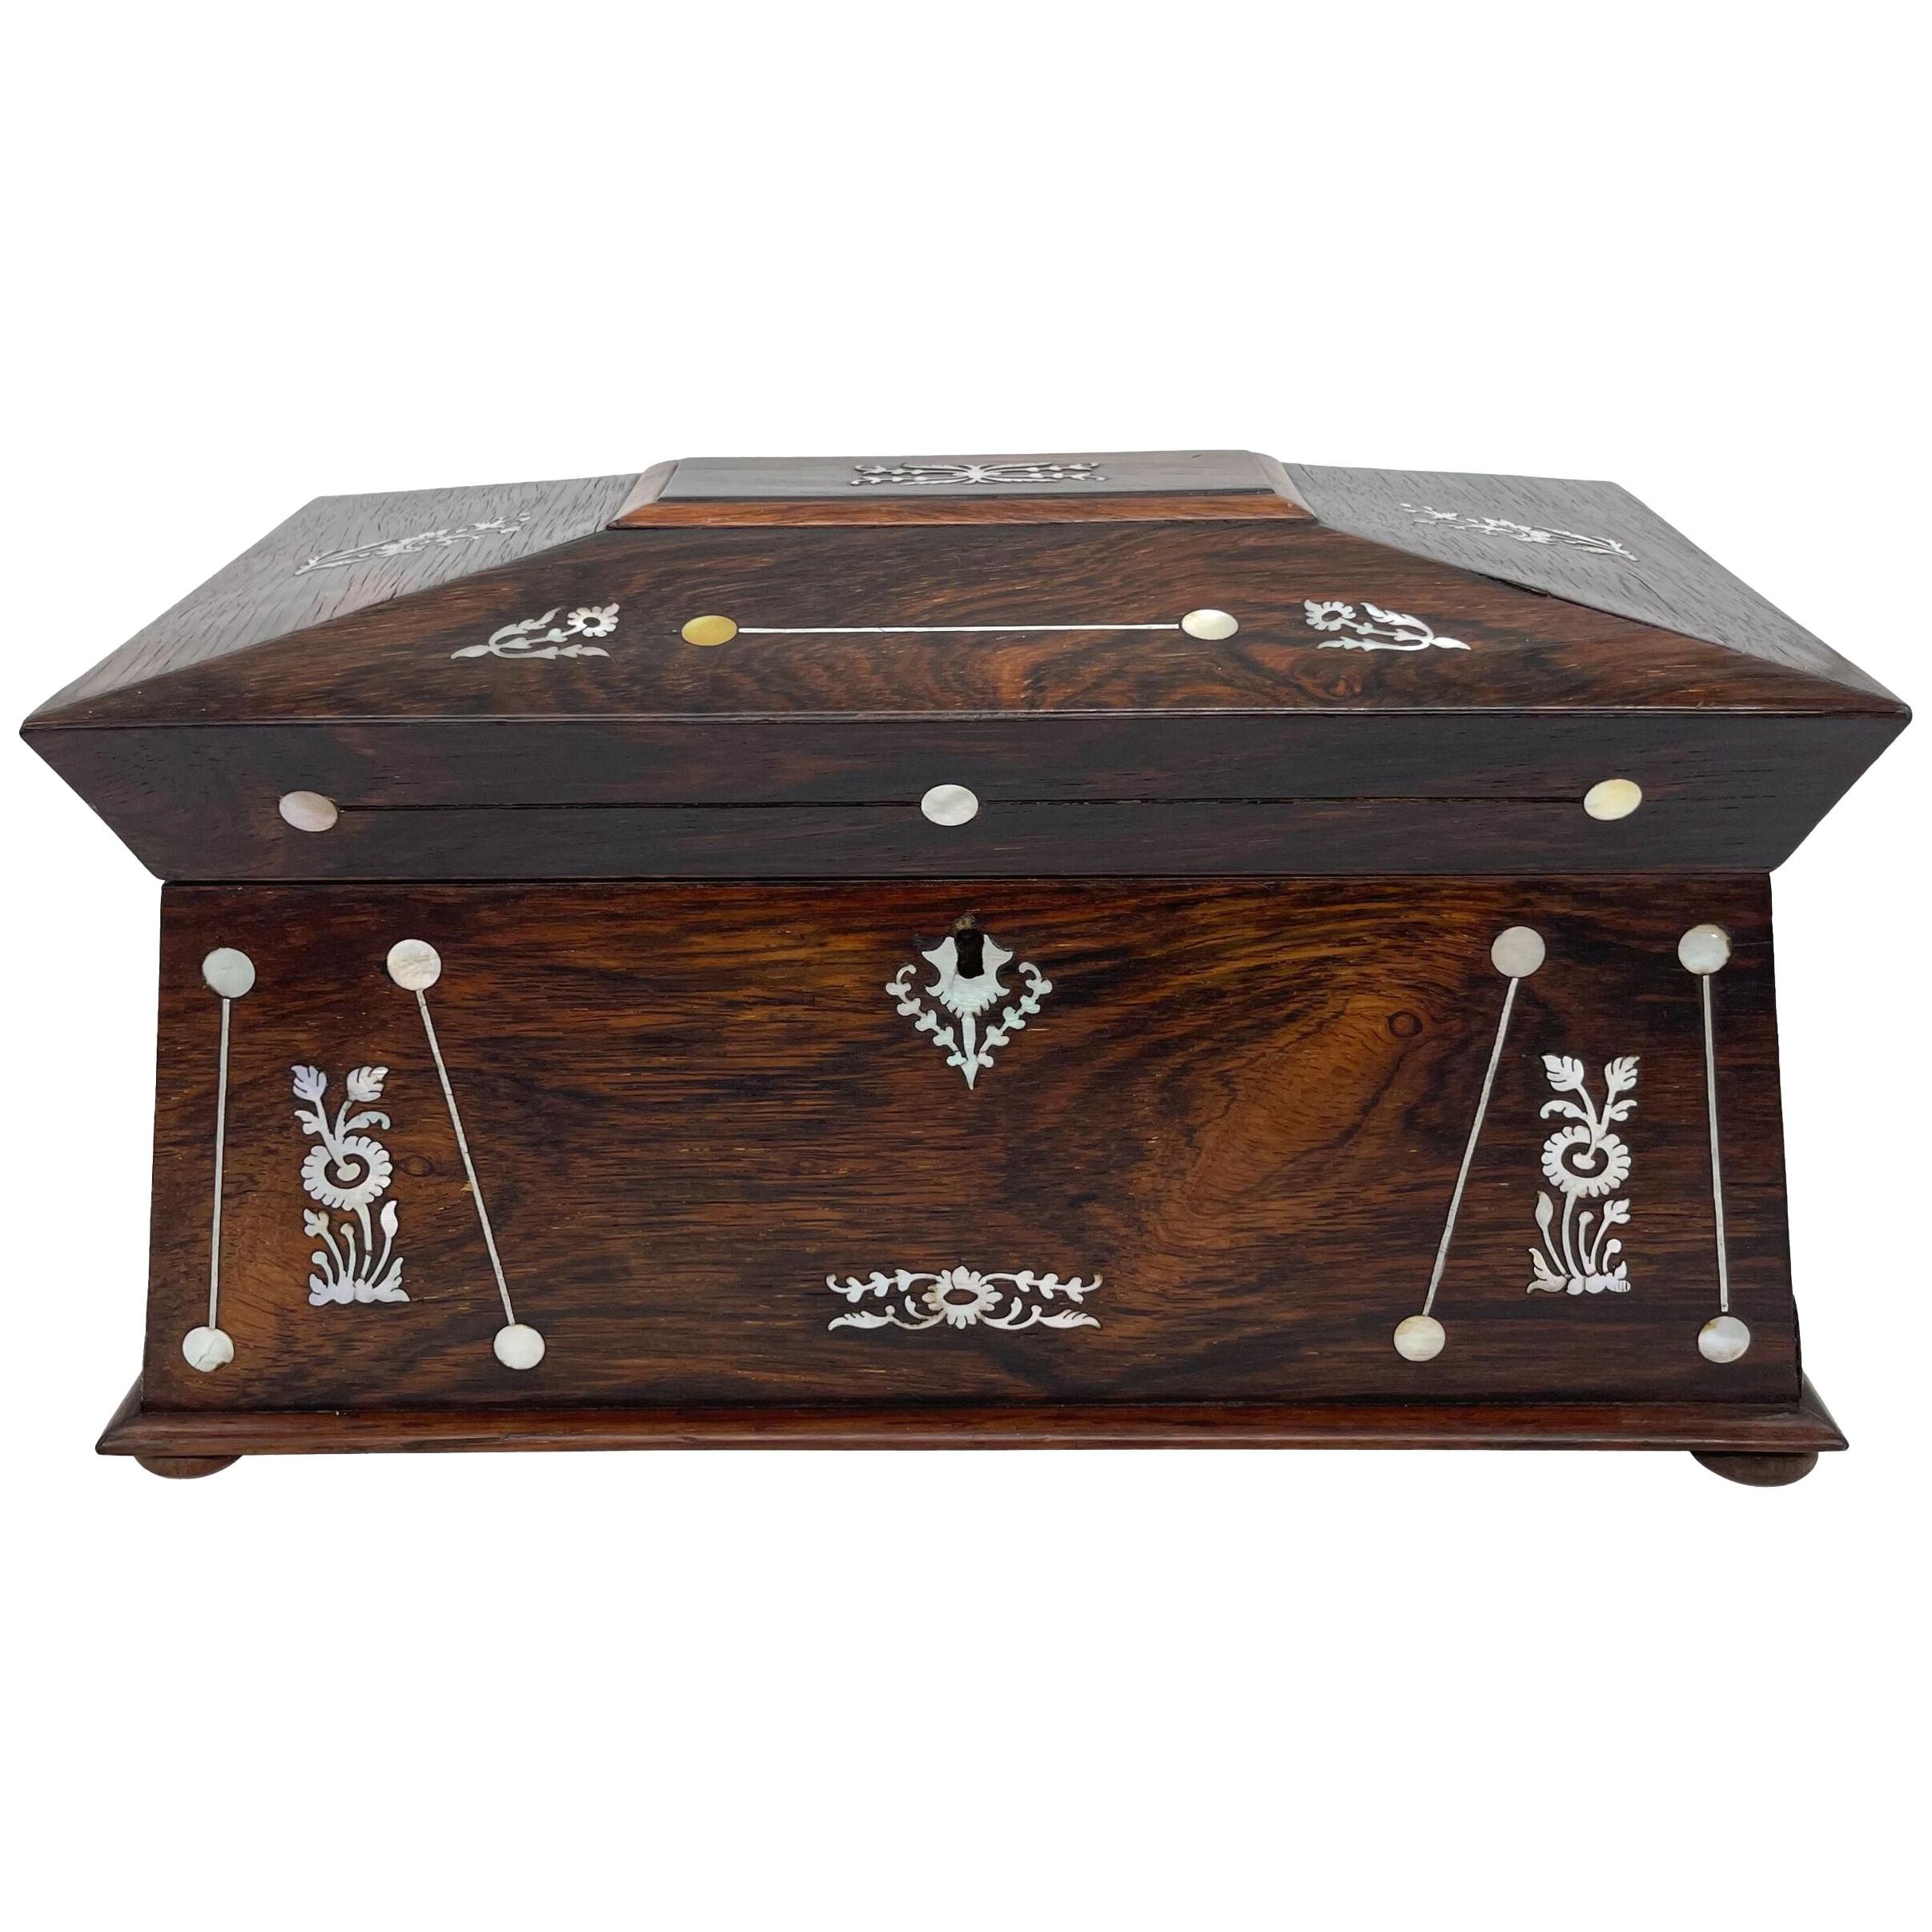 Large William IV Rosewood Tea Caddy with Mother-of-Pearl Inlays, ca. 1835